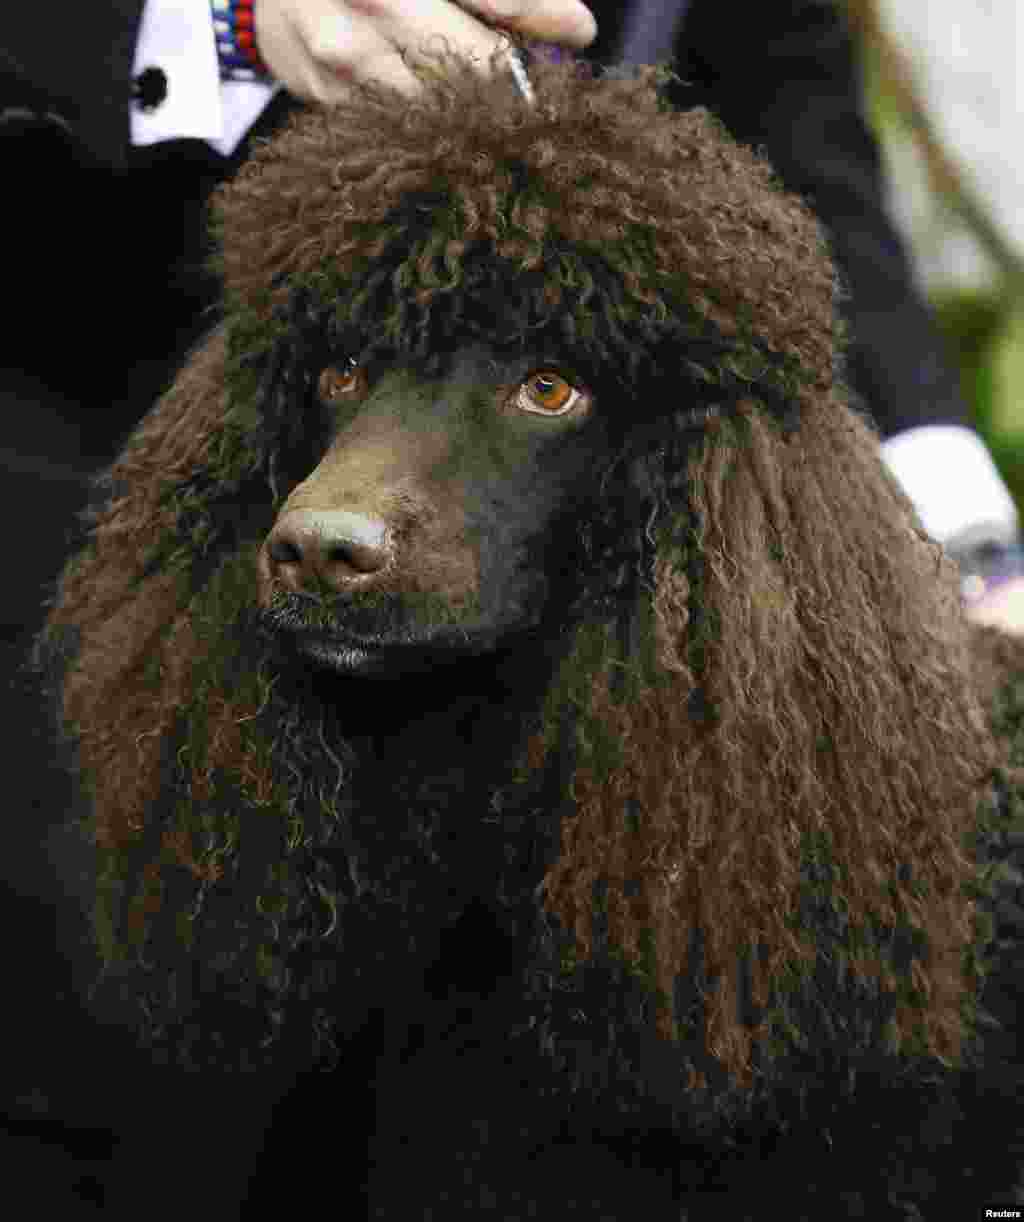 Riley, an Irish water spaniel breed, winner of the sporting group, stands at the 138th Westminster Kennel Club Dog Show, Madison Square Garden, New York City, NY, Feb. 11, 2014.